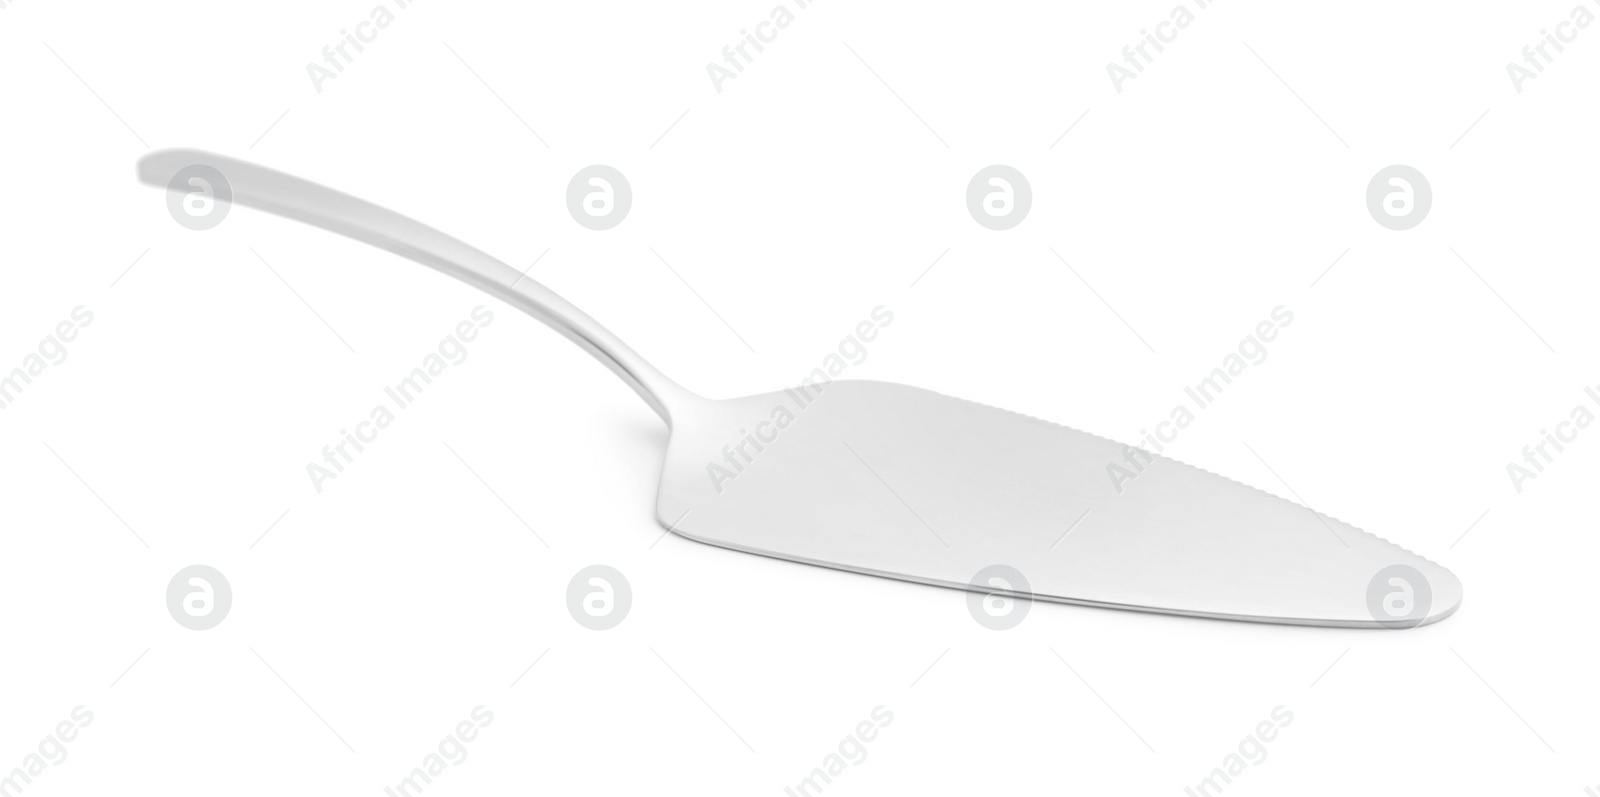 Photo of New stainless steel spatula isolated on white